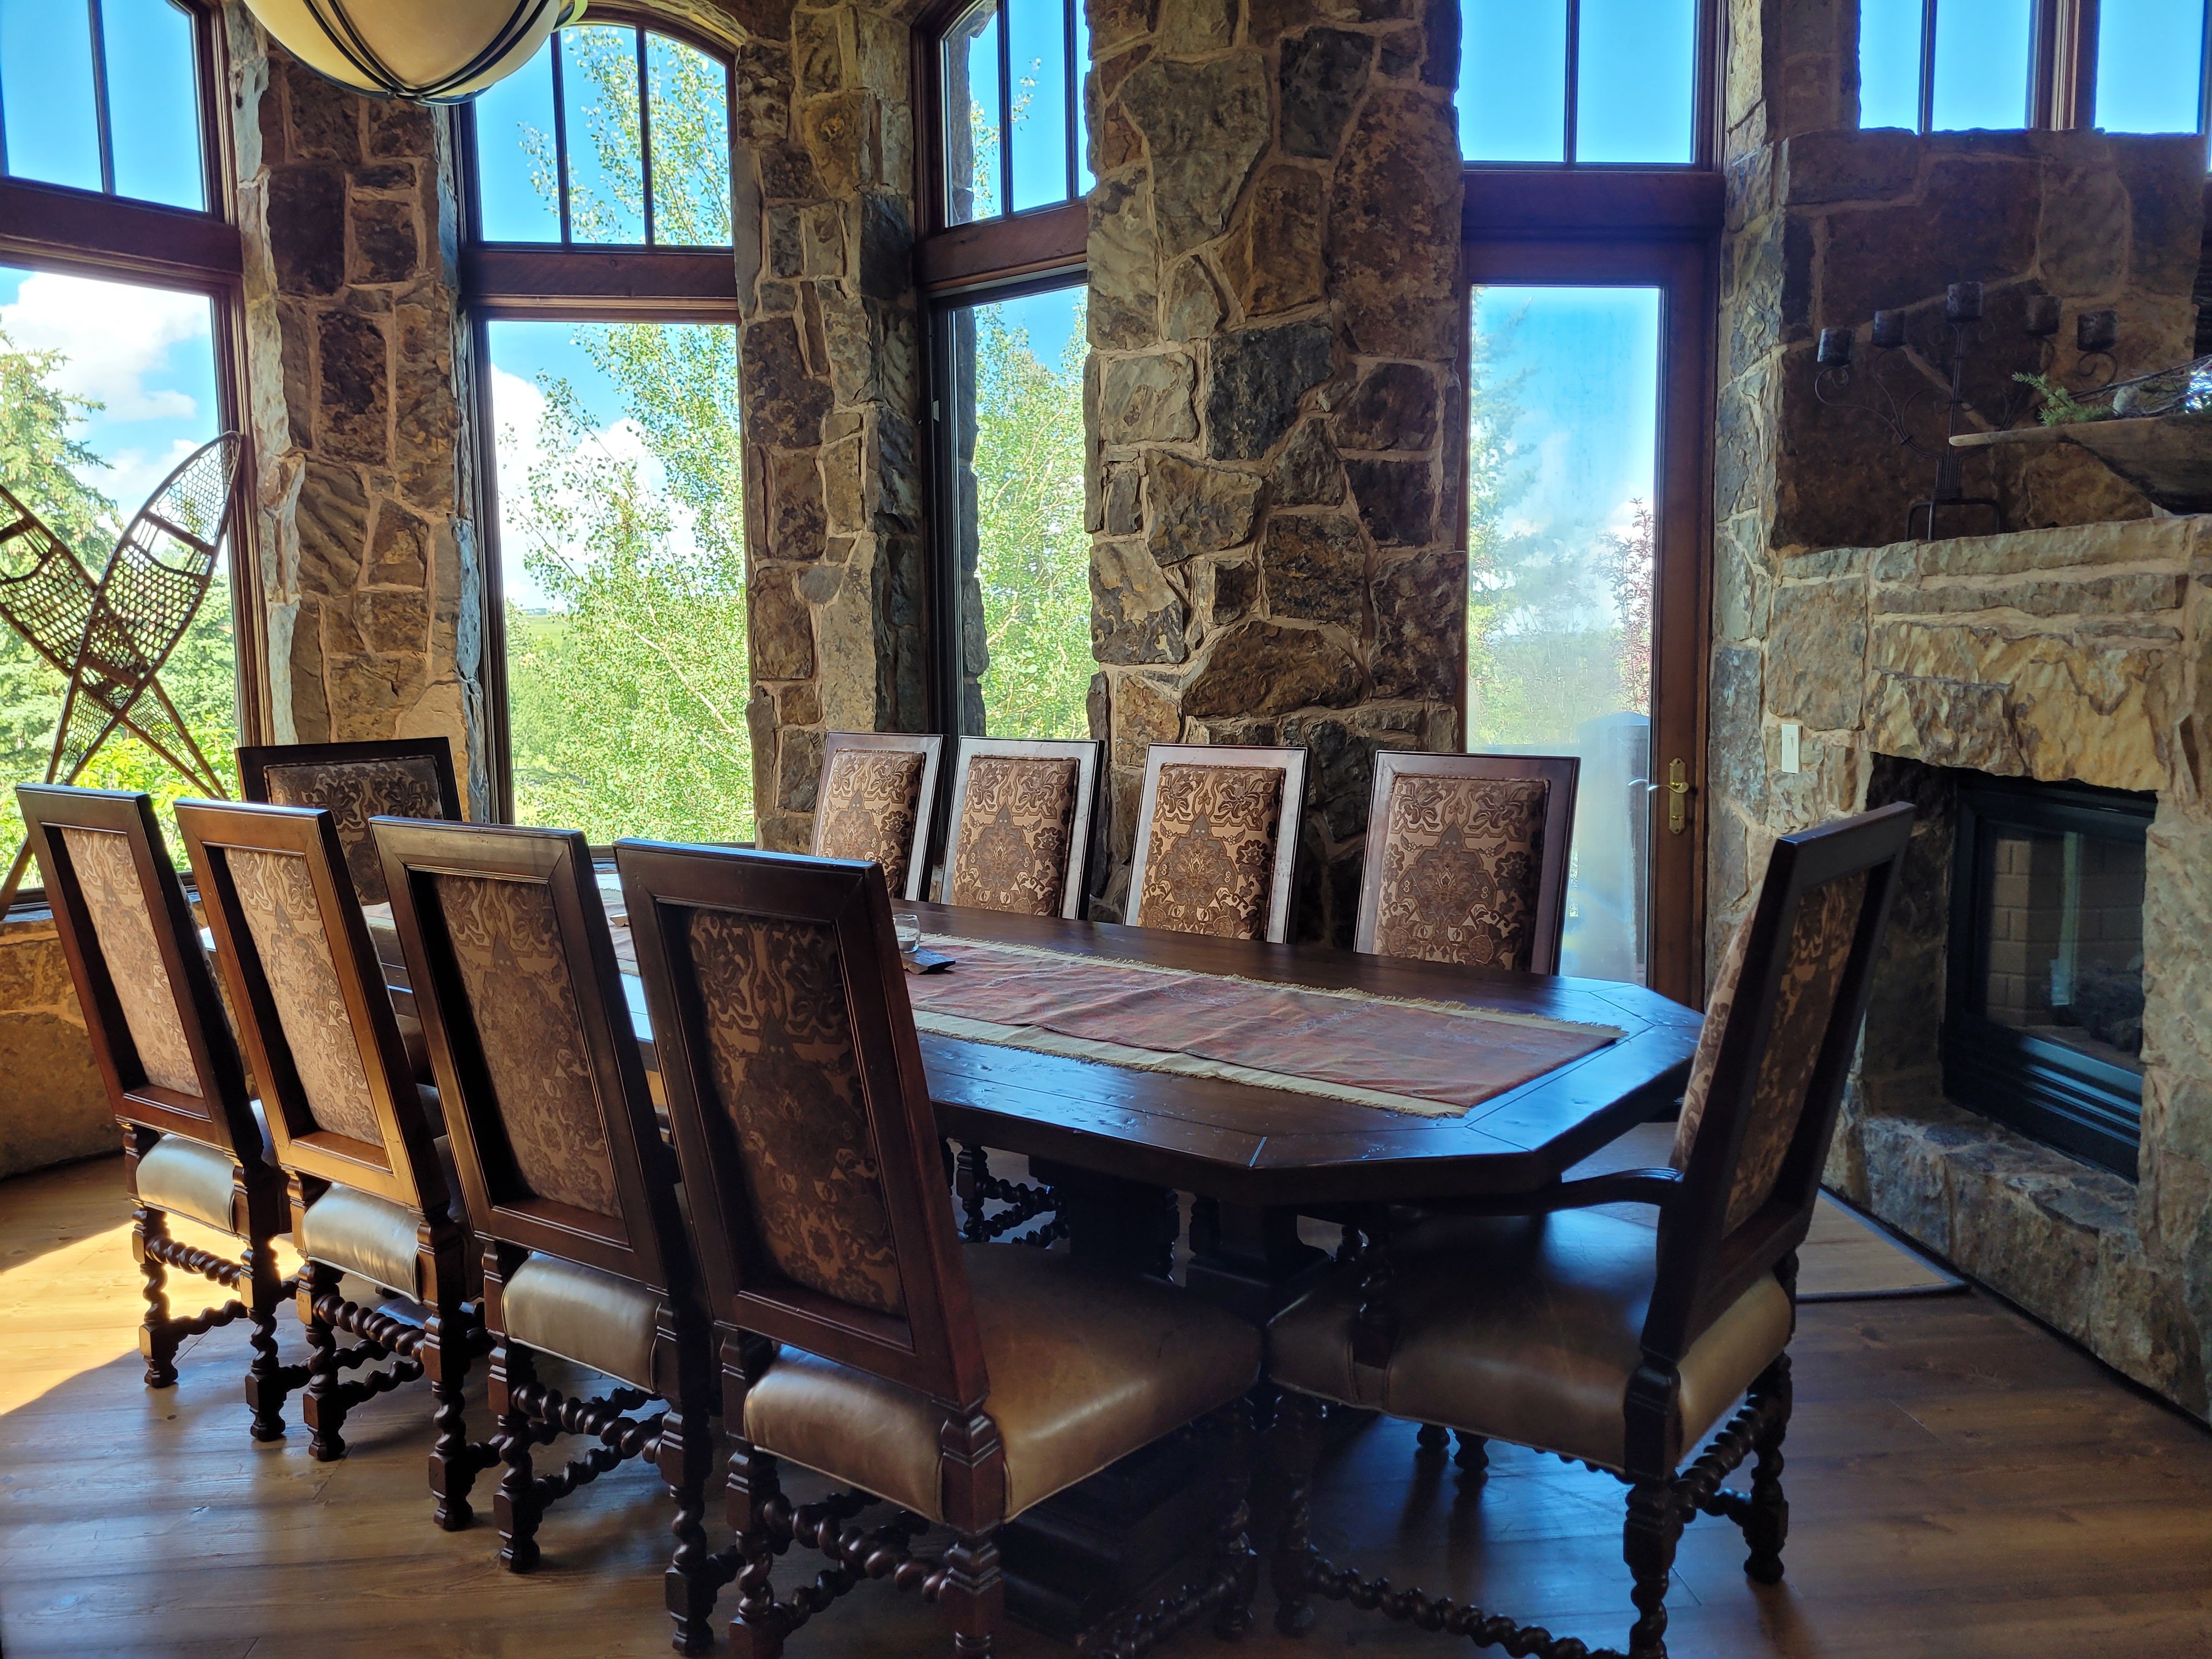 Luxury dining room with large table and stone walls